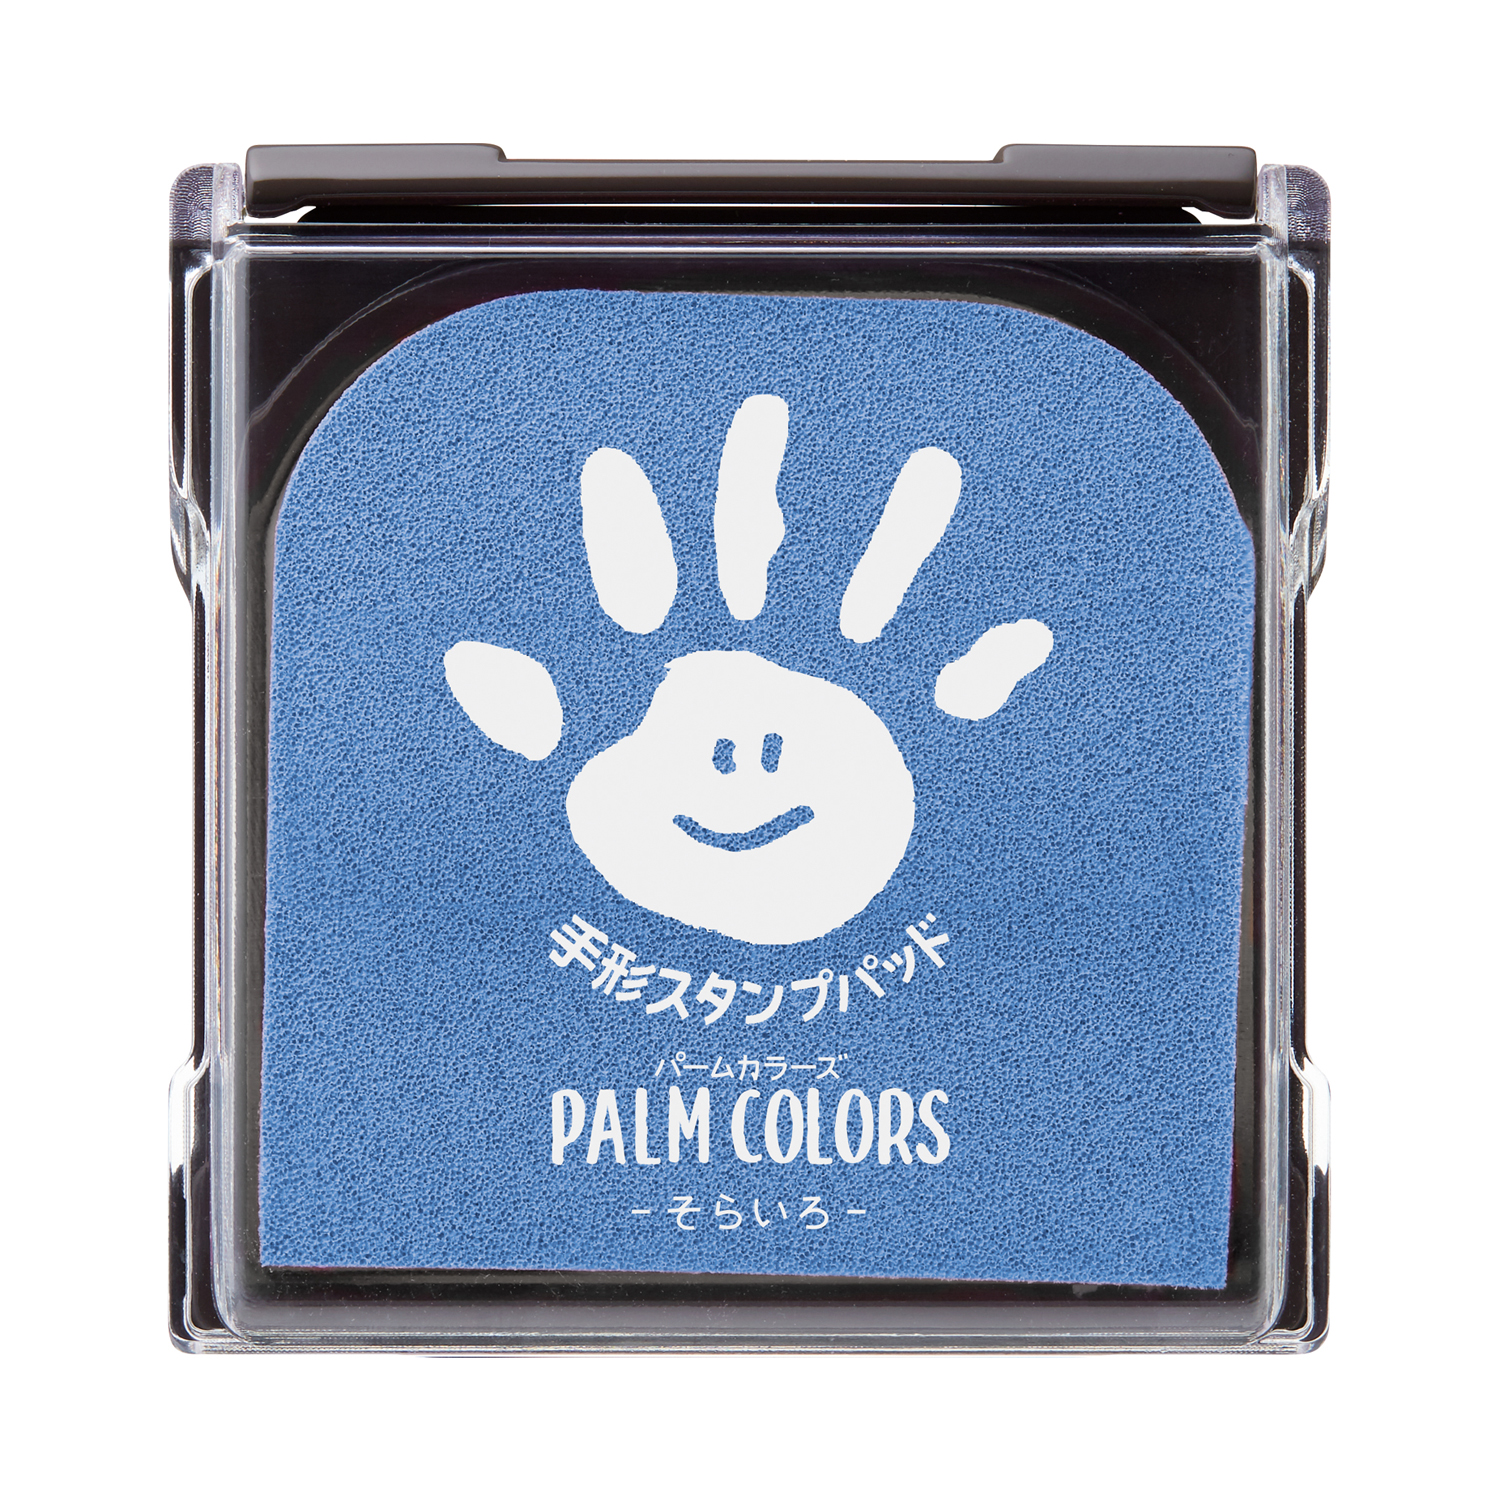 PALM COLORS そらいろ